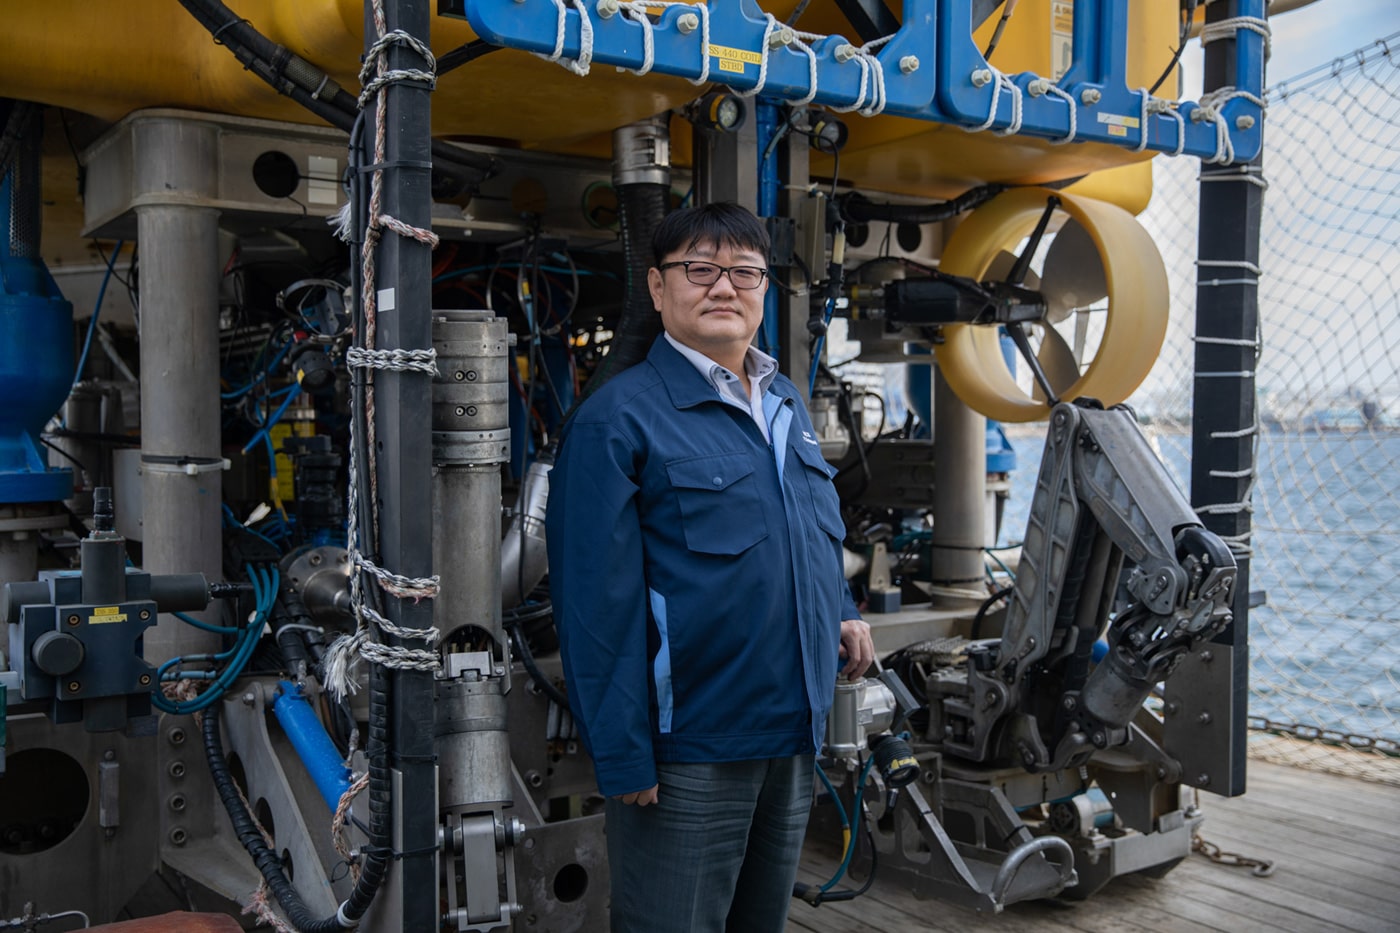 Fumihide Kobayashi standing in front of the submersible Marcas.